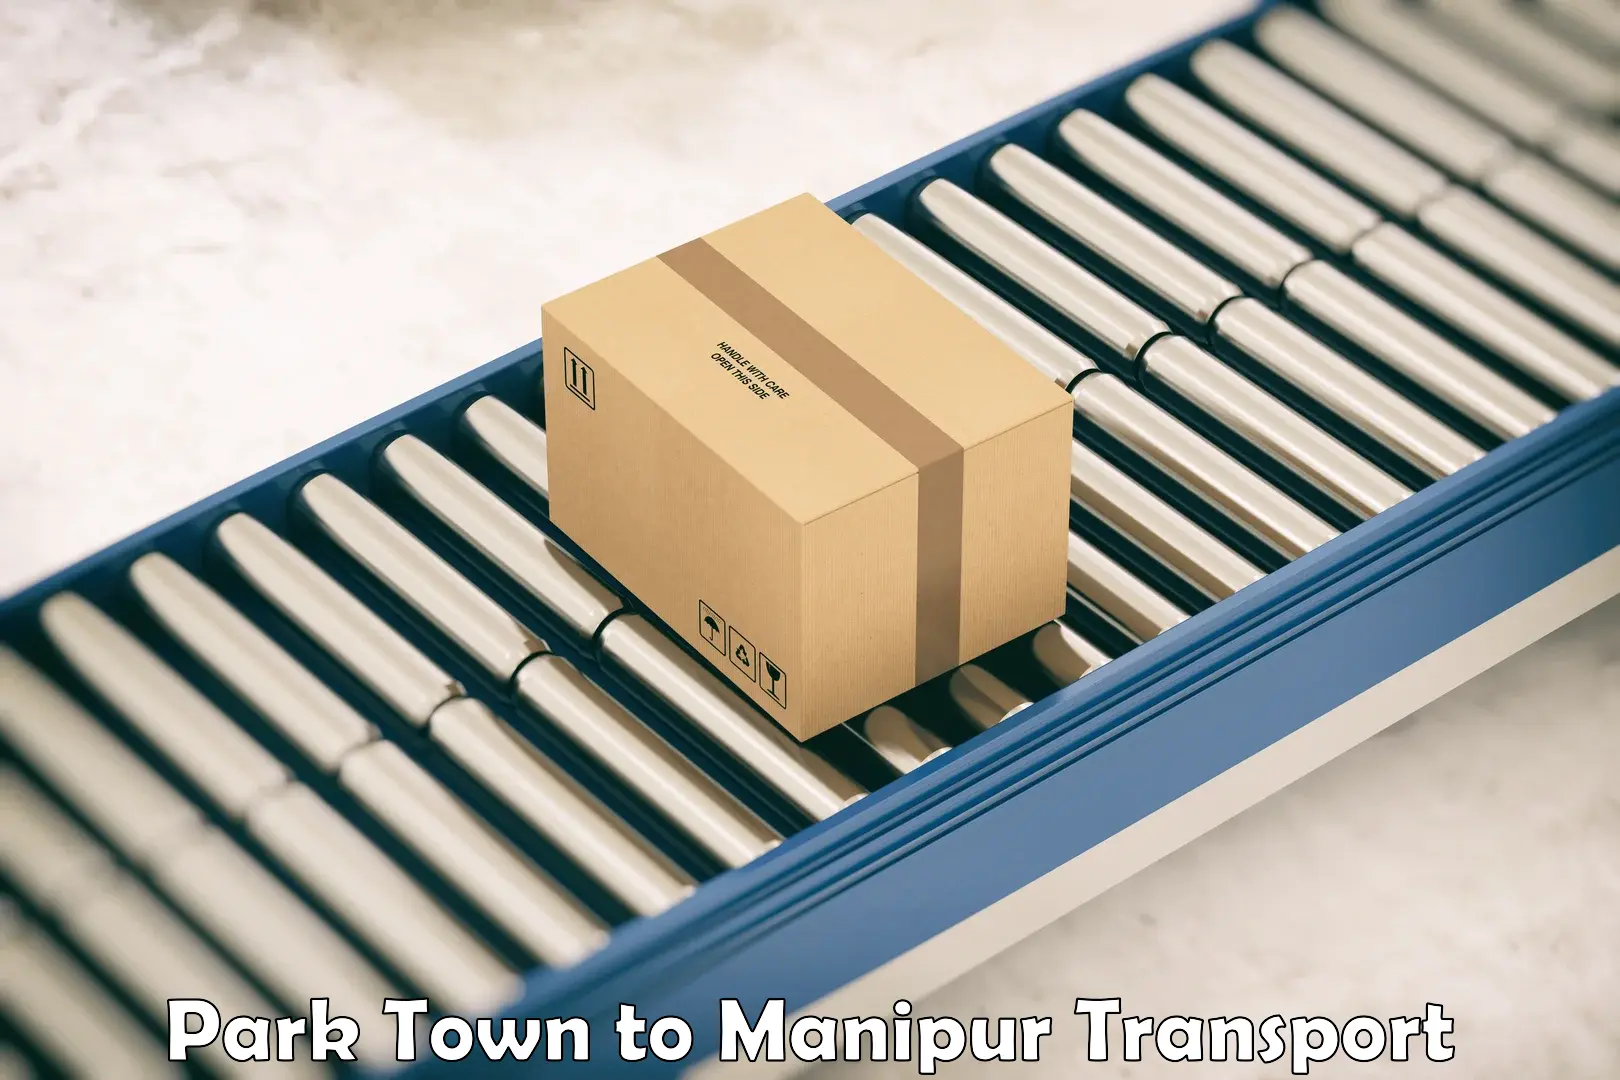 Express transport services Park Town to Manipur